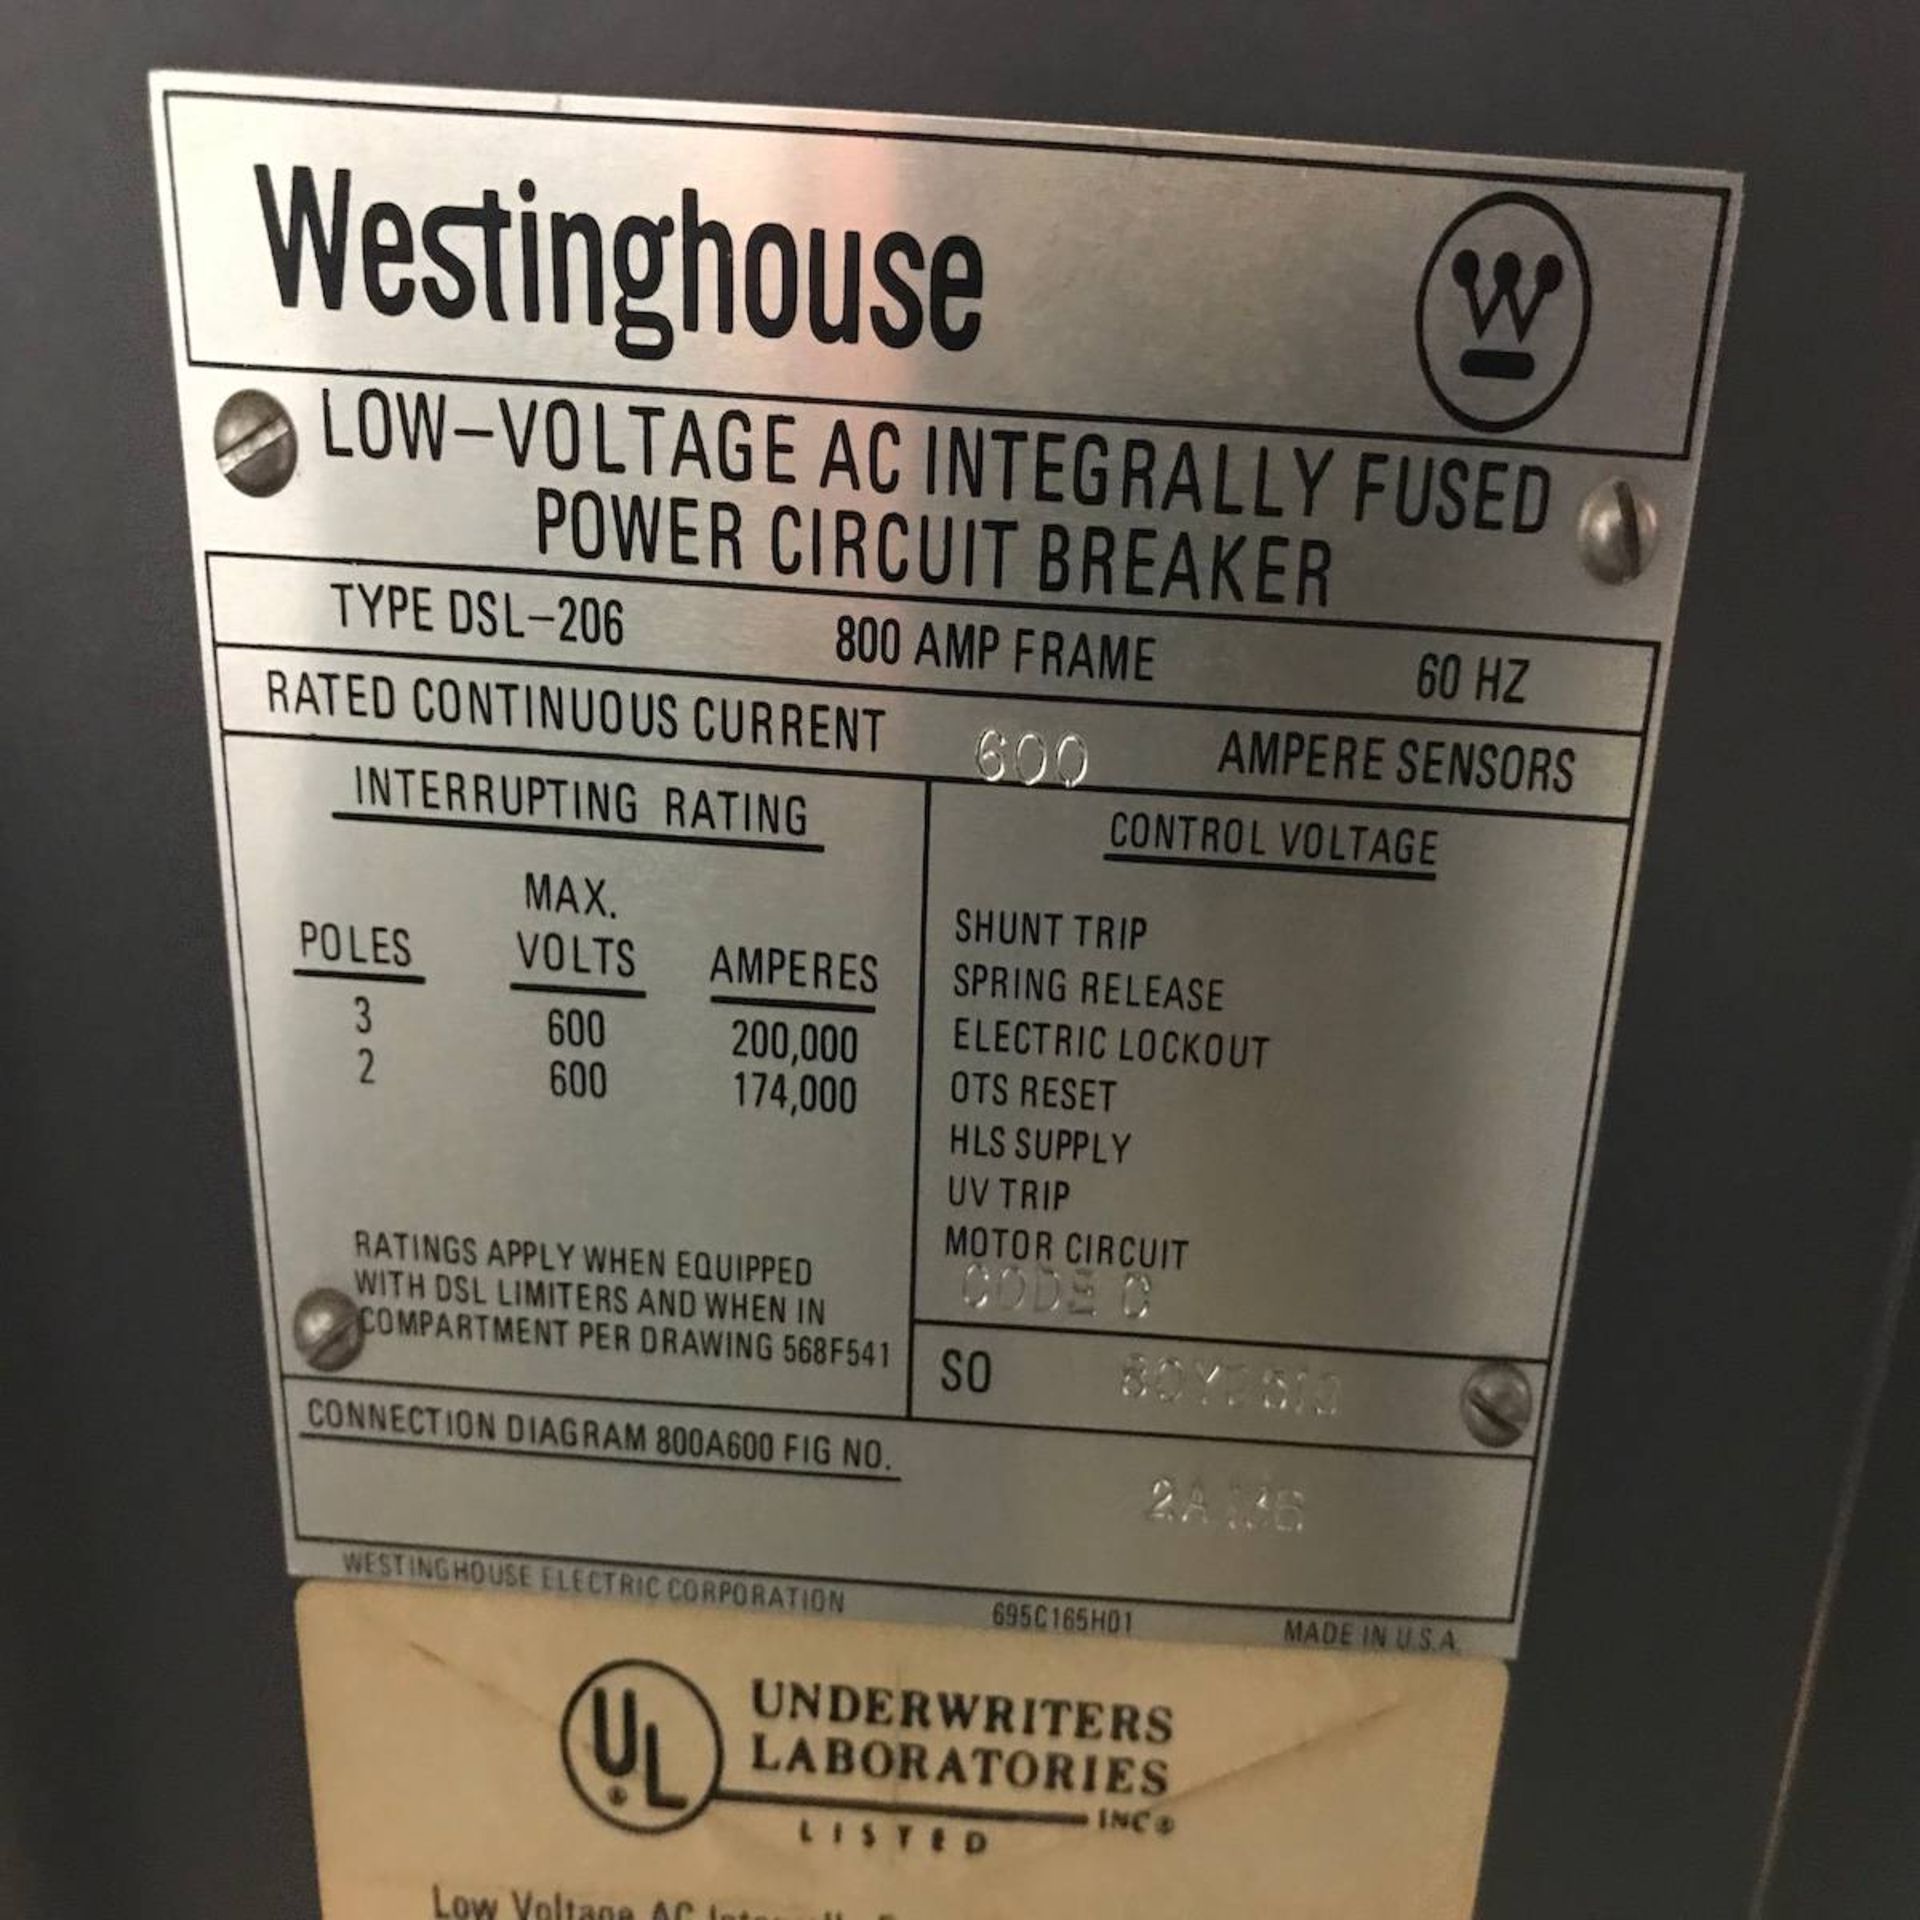 Westinghouse DSL-206 Low Voltage AC Integrally Fused Power Circuit Breaker - Image 4 of 4